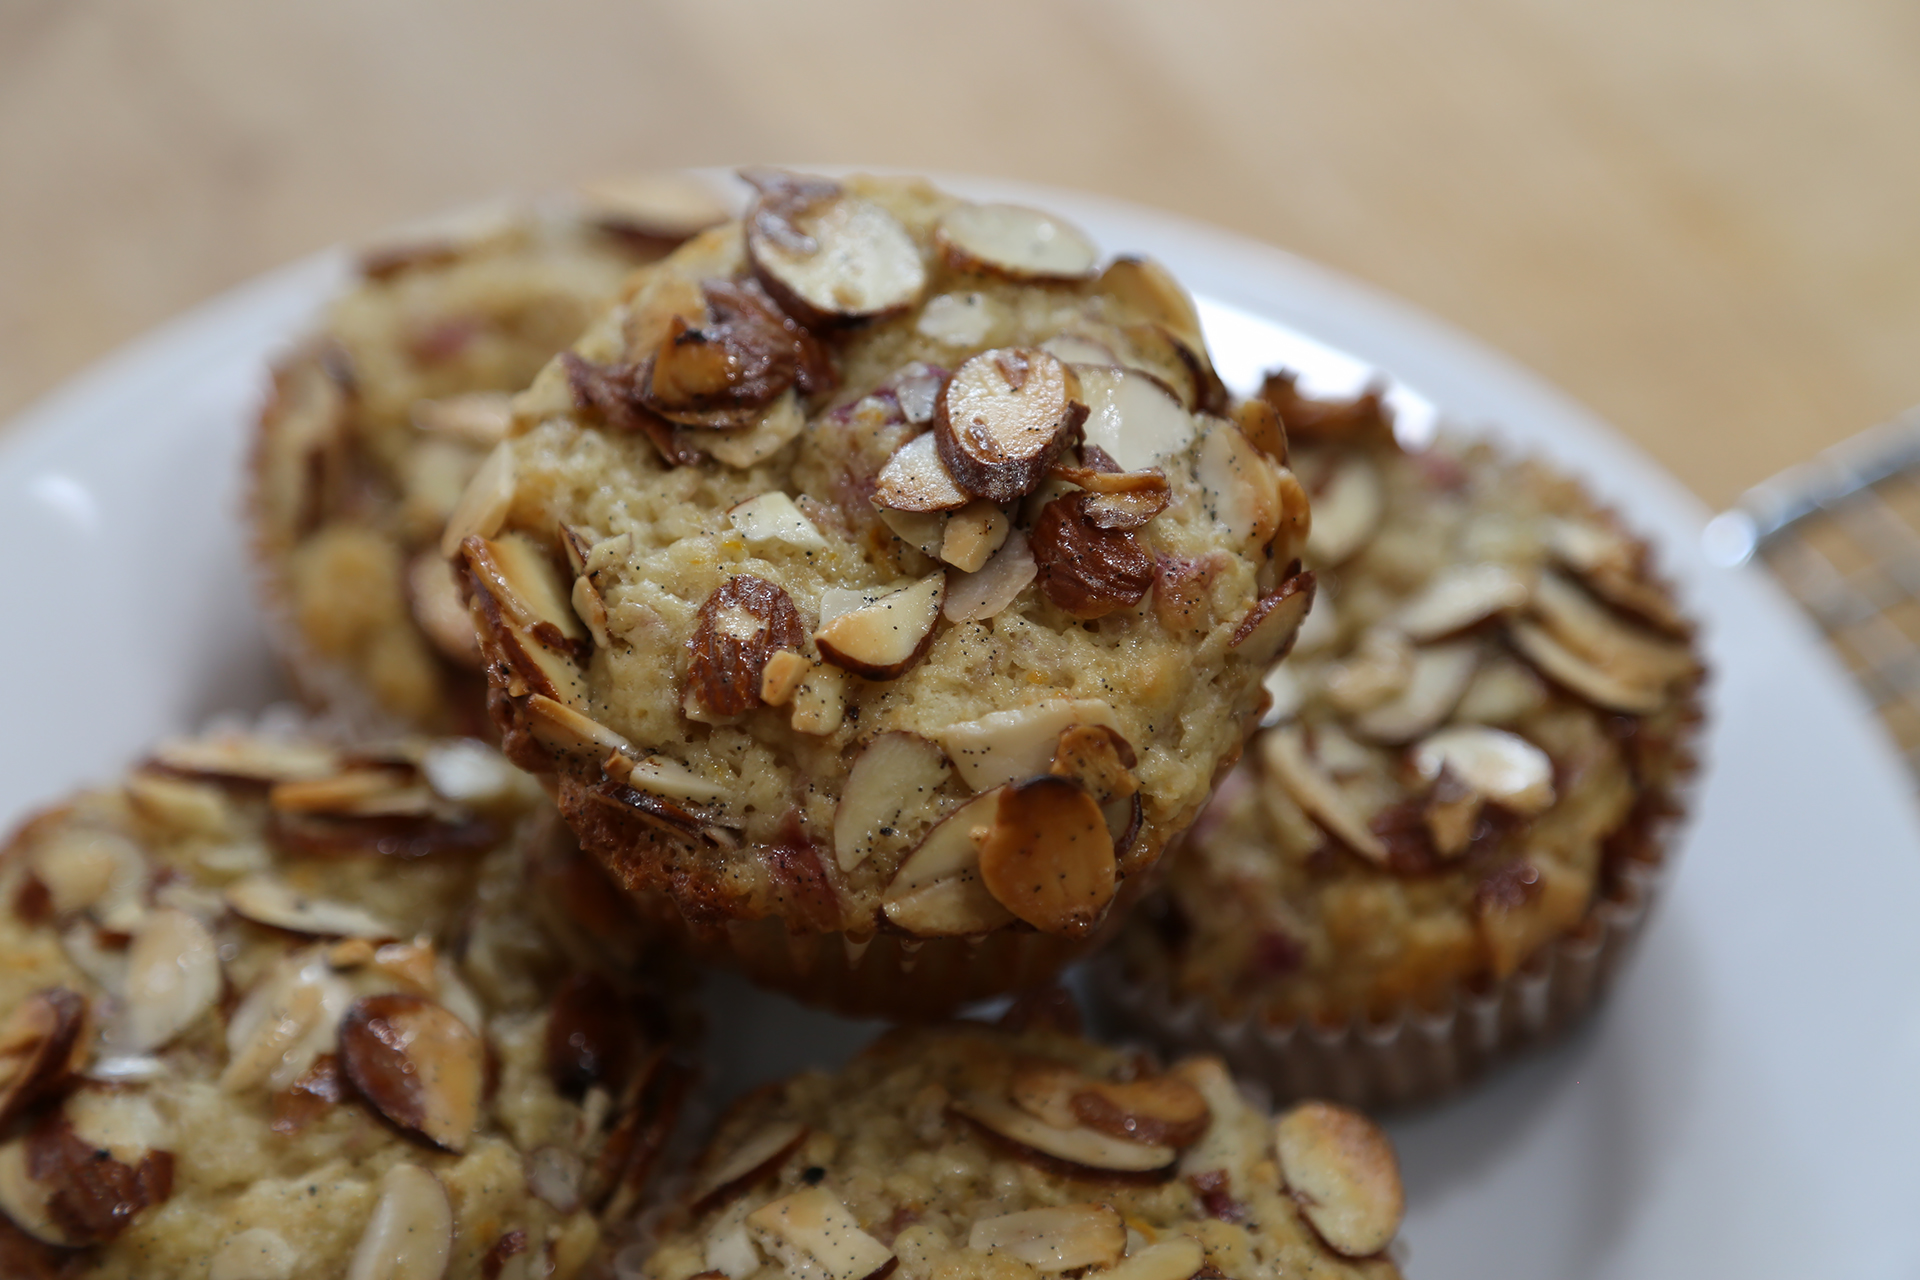 The muffins are best served the day they are baked, but can be stored at room temperature for up to 3 days and briefly re-heated in a 400F oven. Or, freeze the muffins in a zippered plastic freezer bag for up to 3 months; let defrost at room temperature, then re-heat in a 400F oven.